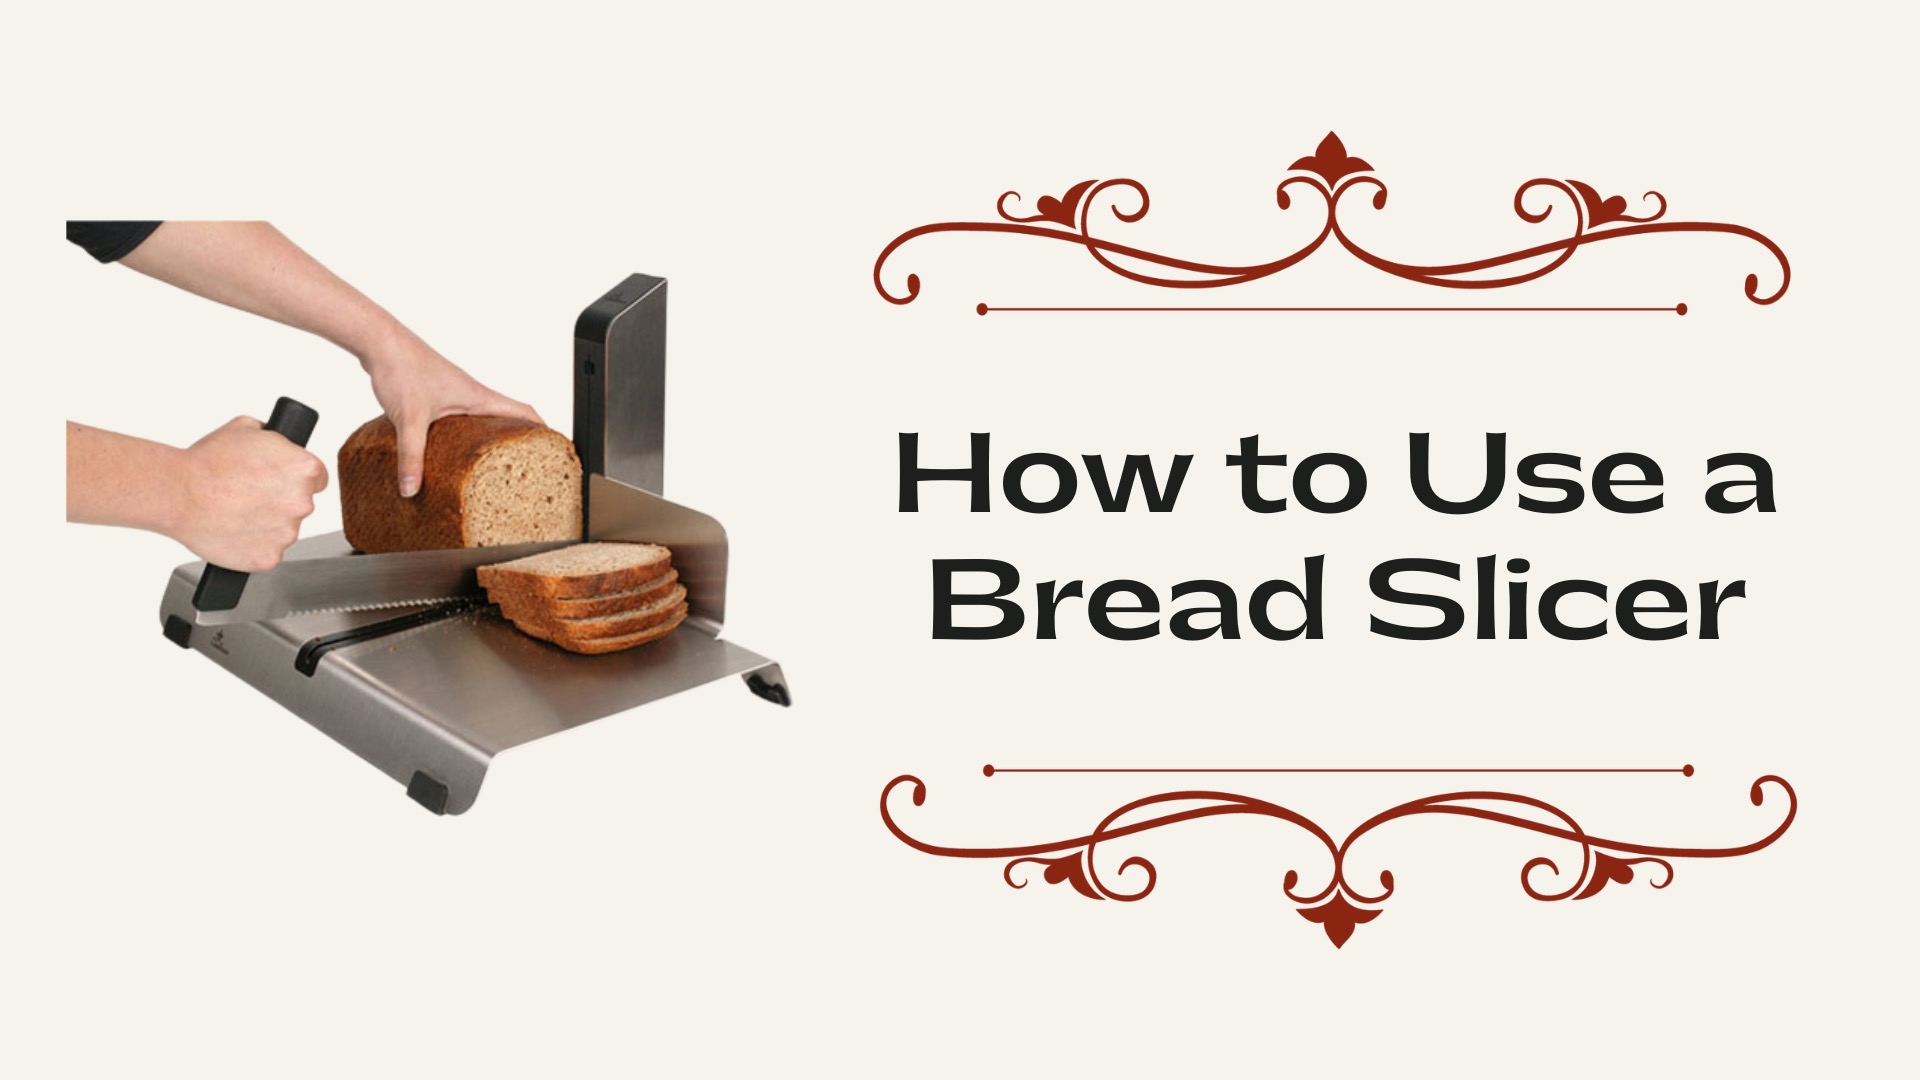 How to Use a Bread Slicer